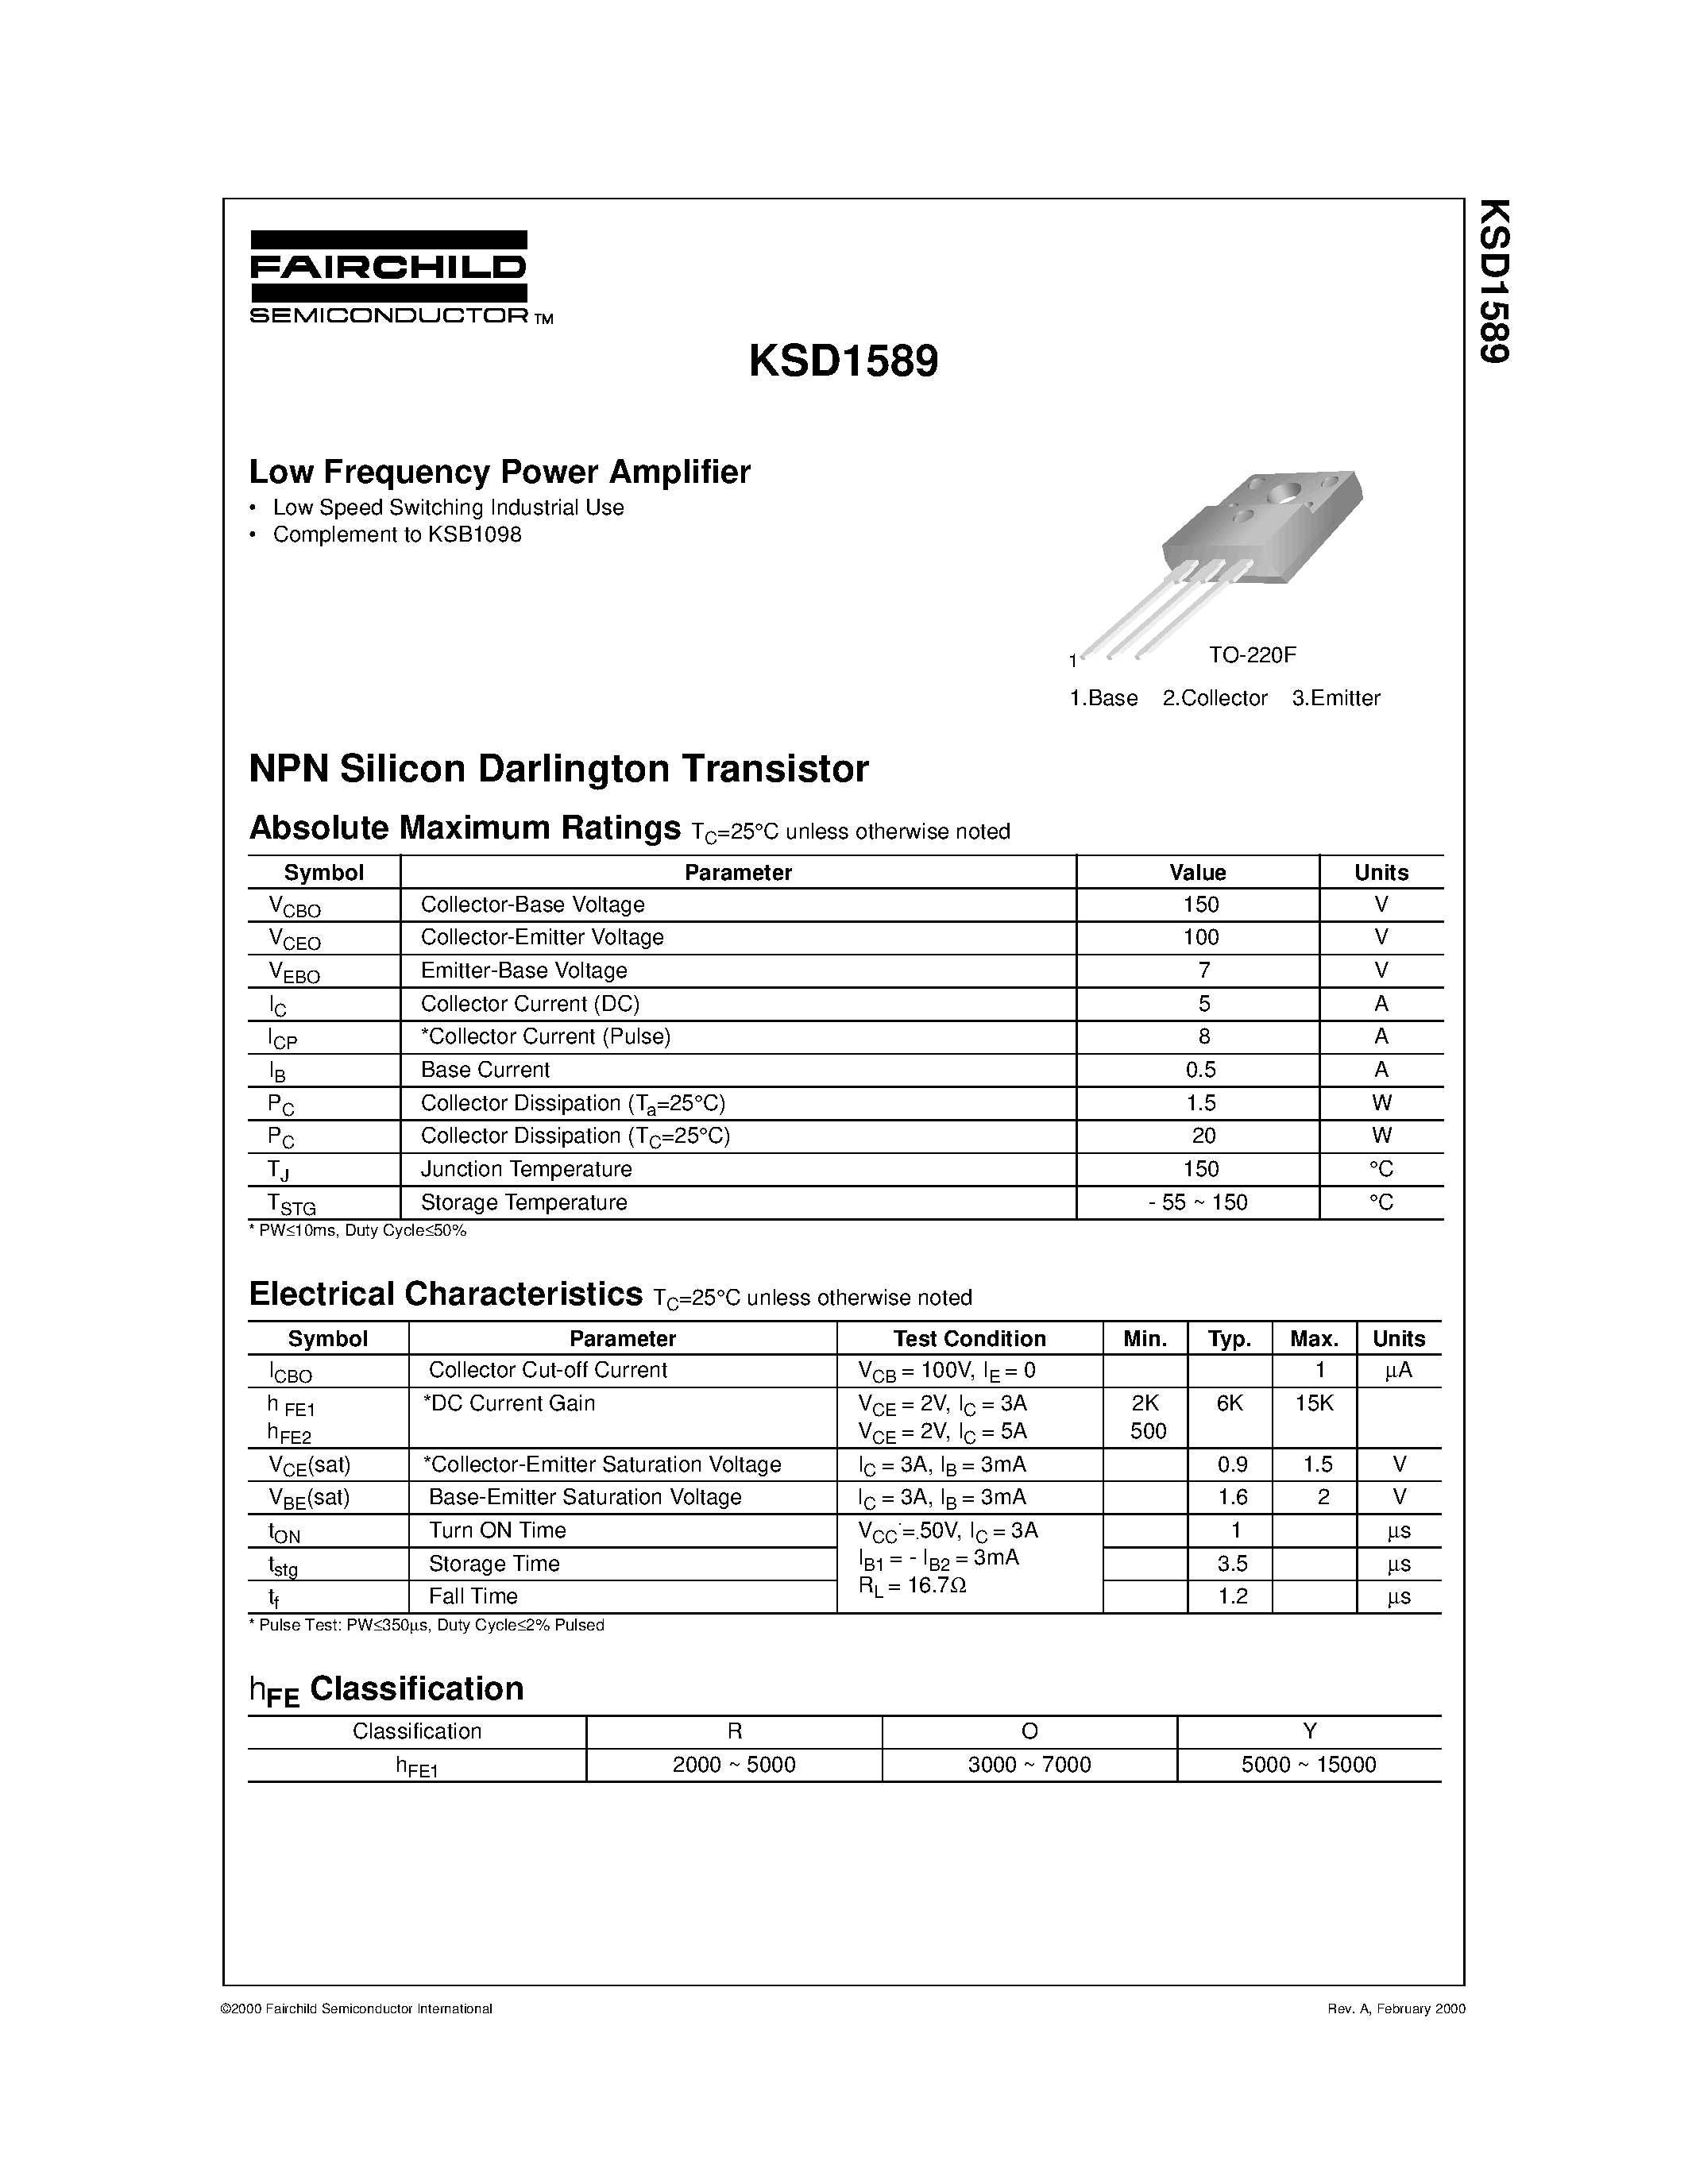 Datasheet KSD1589 - Low Frequency Power Amplifier page 1